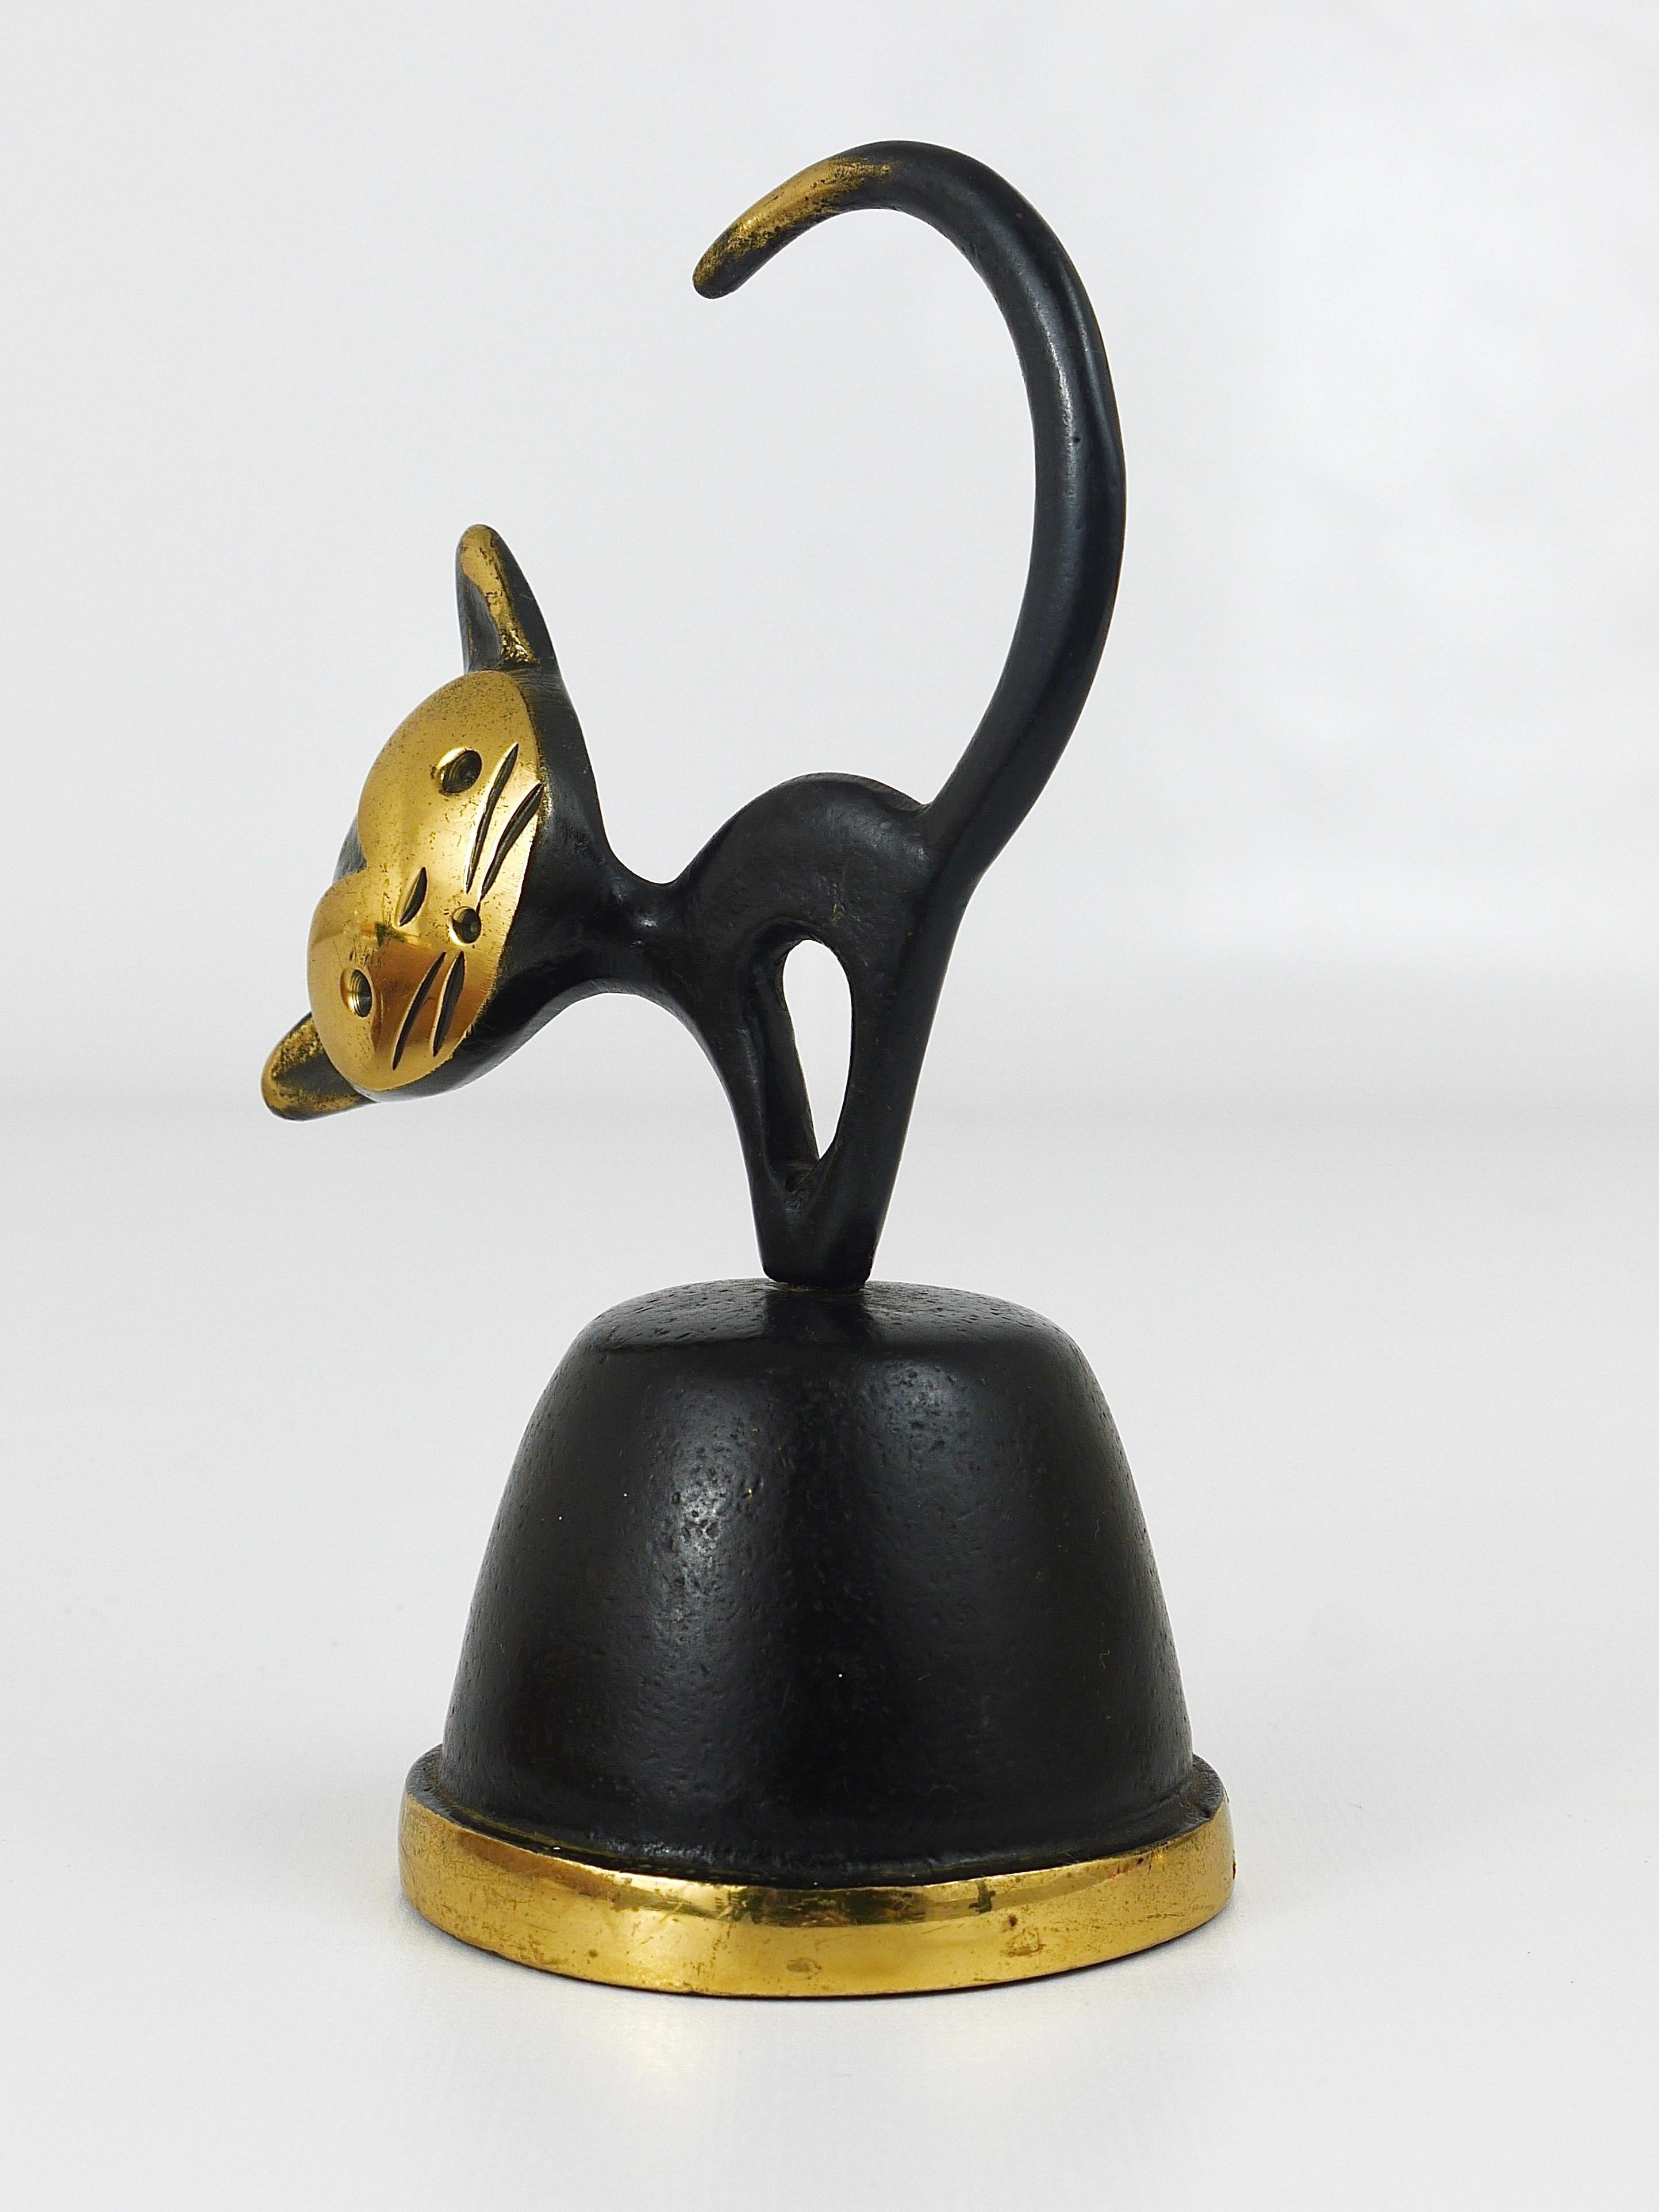 A charming midcentury table bell displaying a cat. A very humorous design by Walter Bosse, executed by Herta Baller Austria in the 1950s. Made of brass, in very good condition.